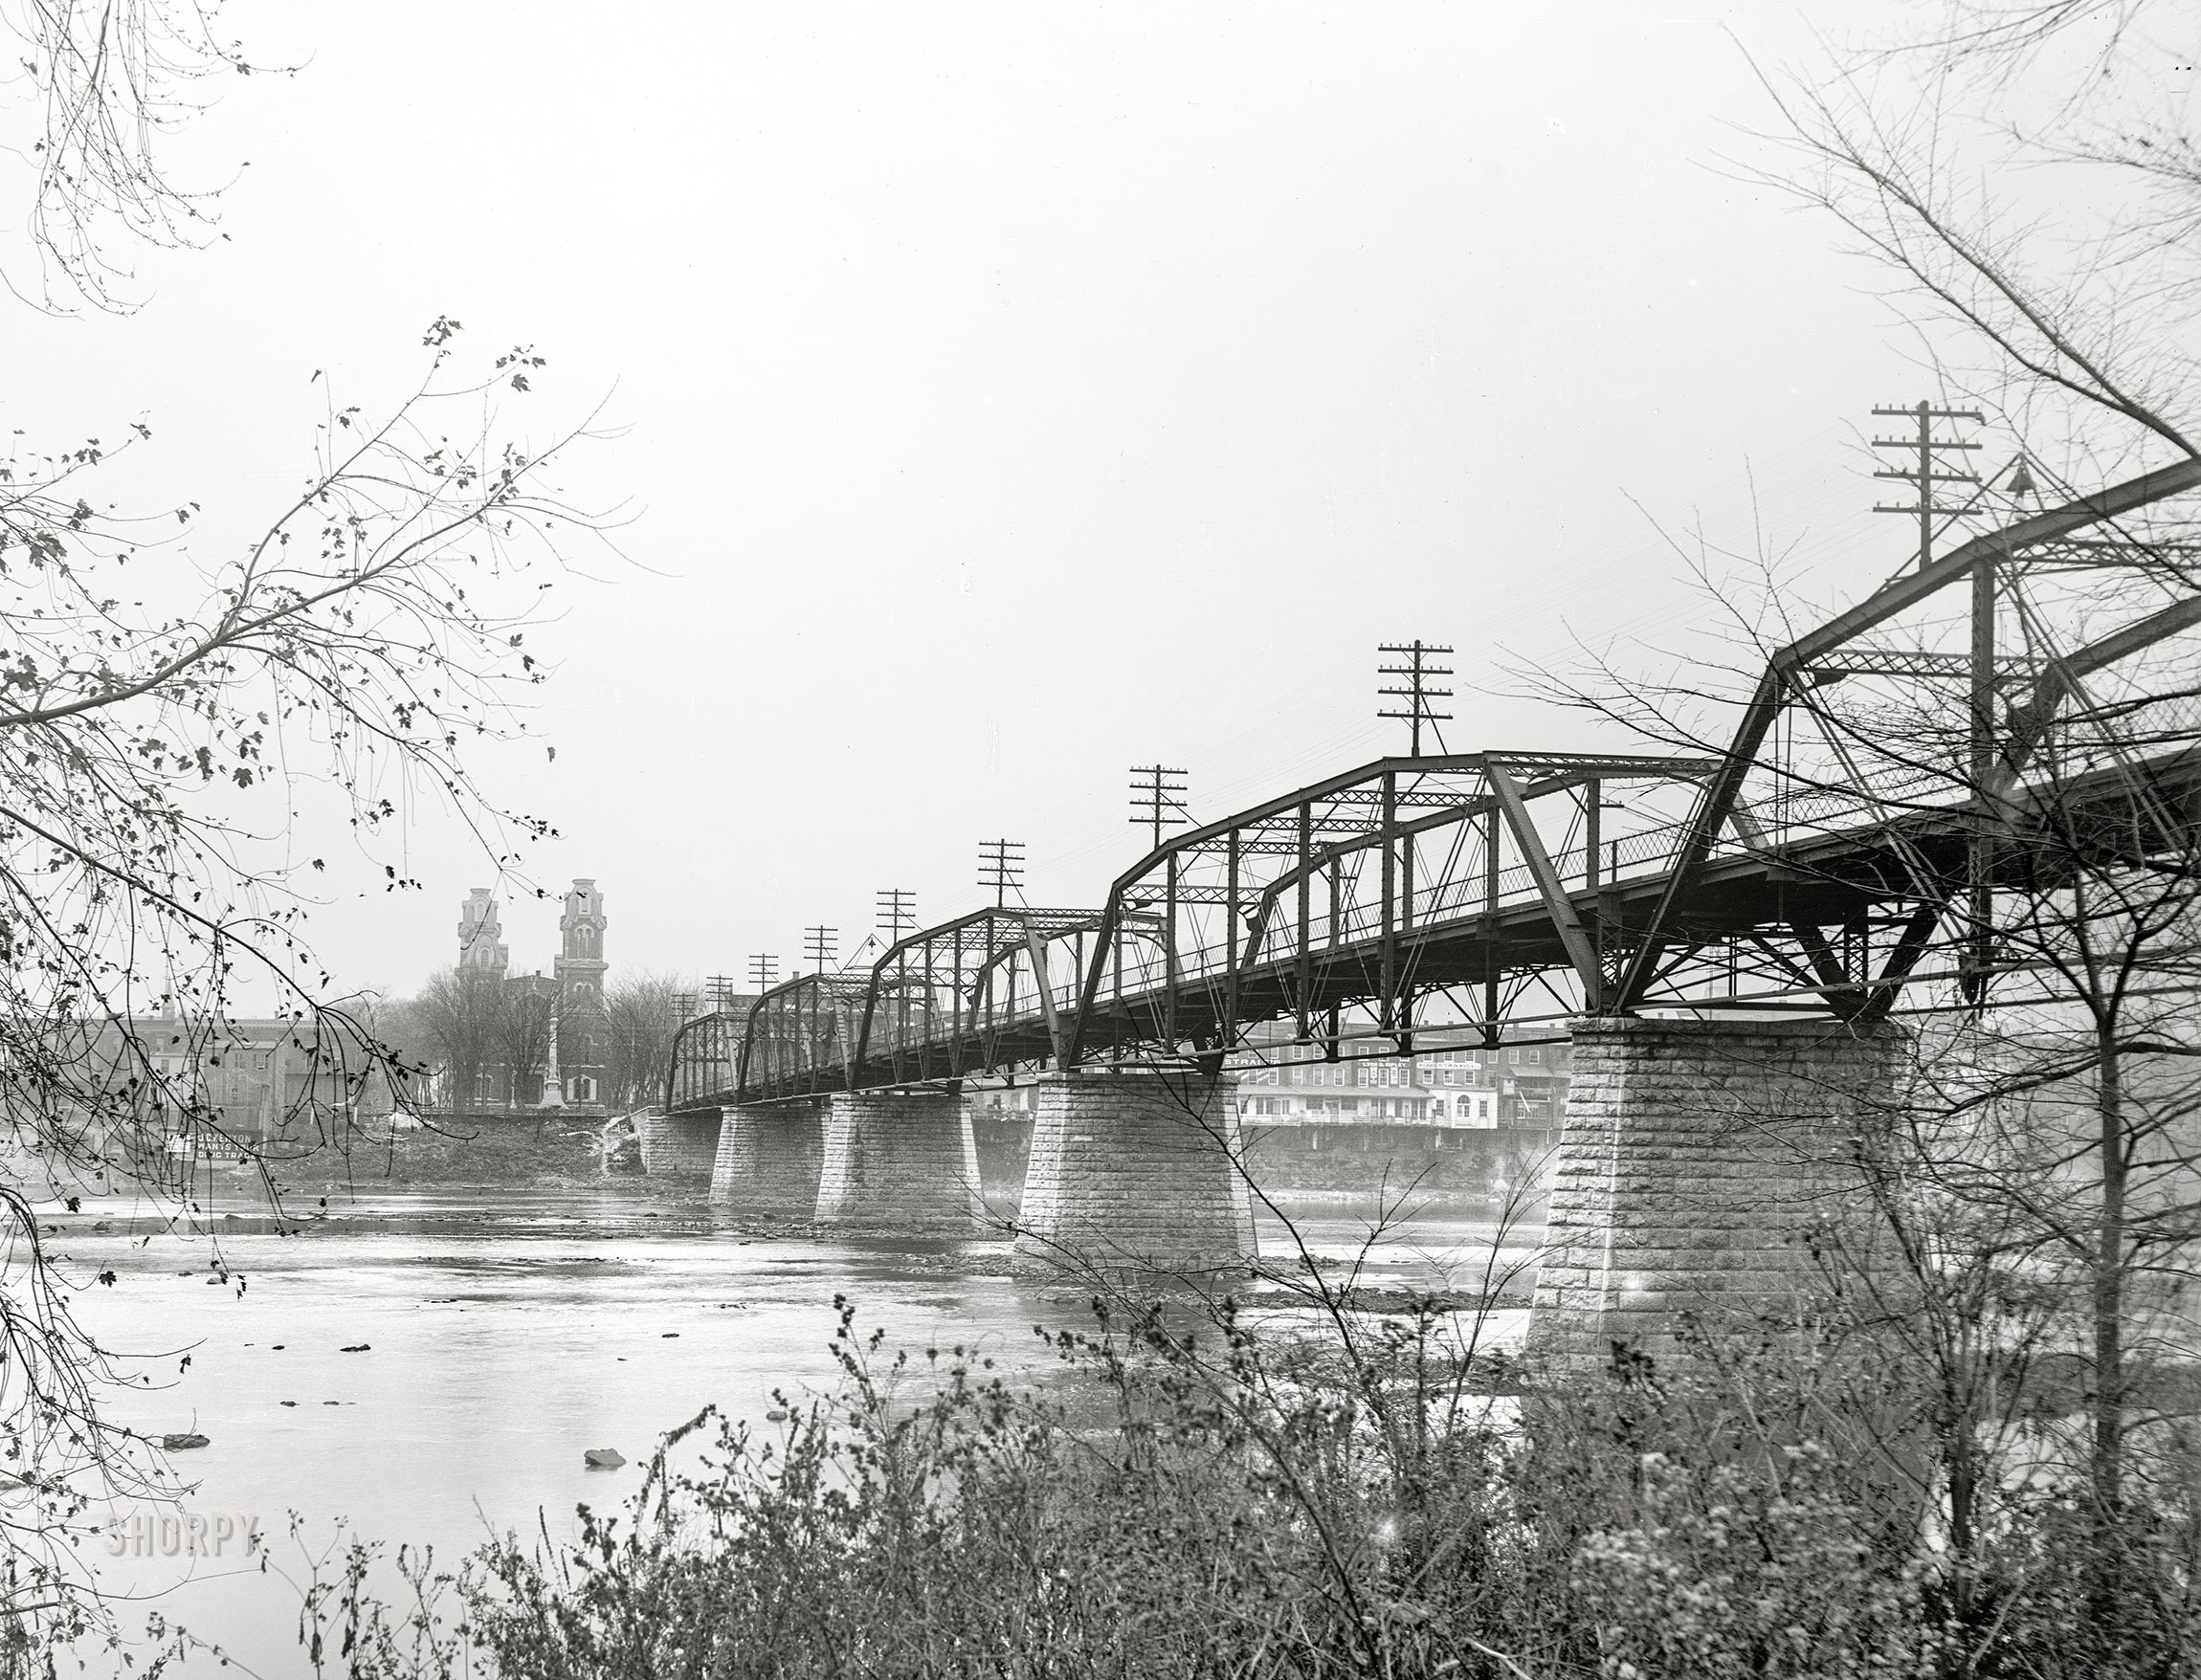 Tioga County, New York, circa 1901. "Bridge over the Susquehanna at Owego." With another message from J.C. Kenyon. 8x10 glass negative, Detroit Photographic Company. View full size.